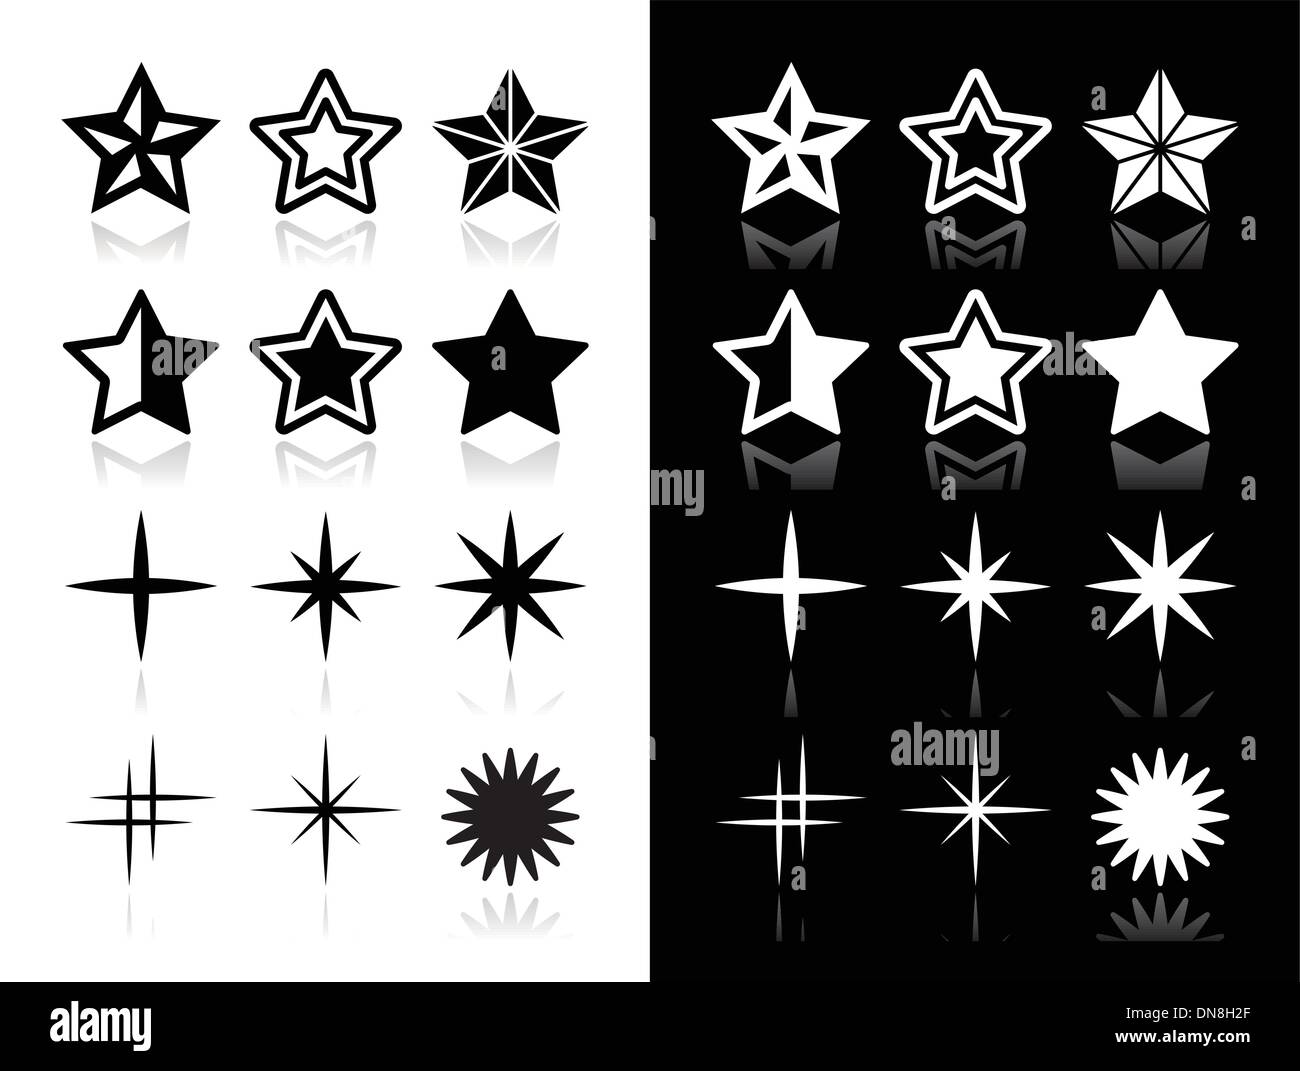 Stars icons with shadow on black and white background Stock Vector